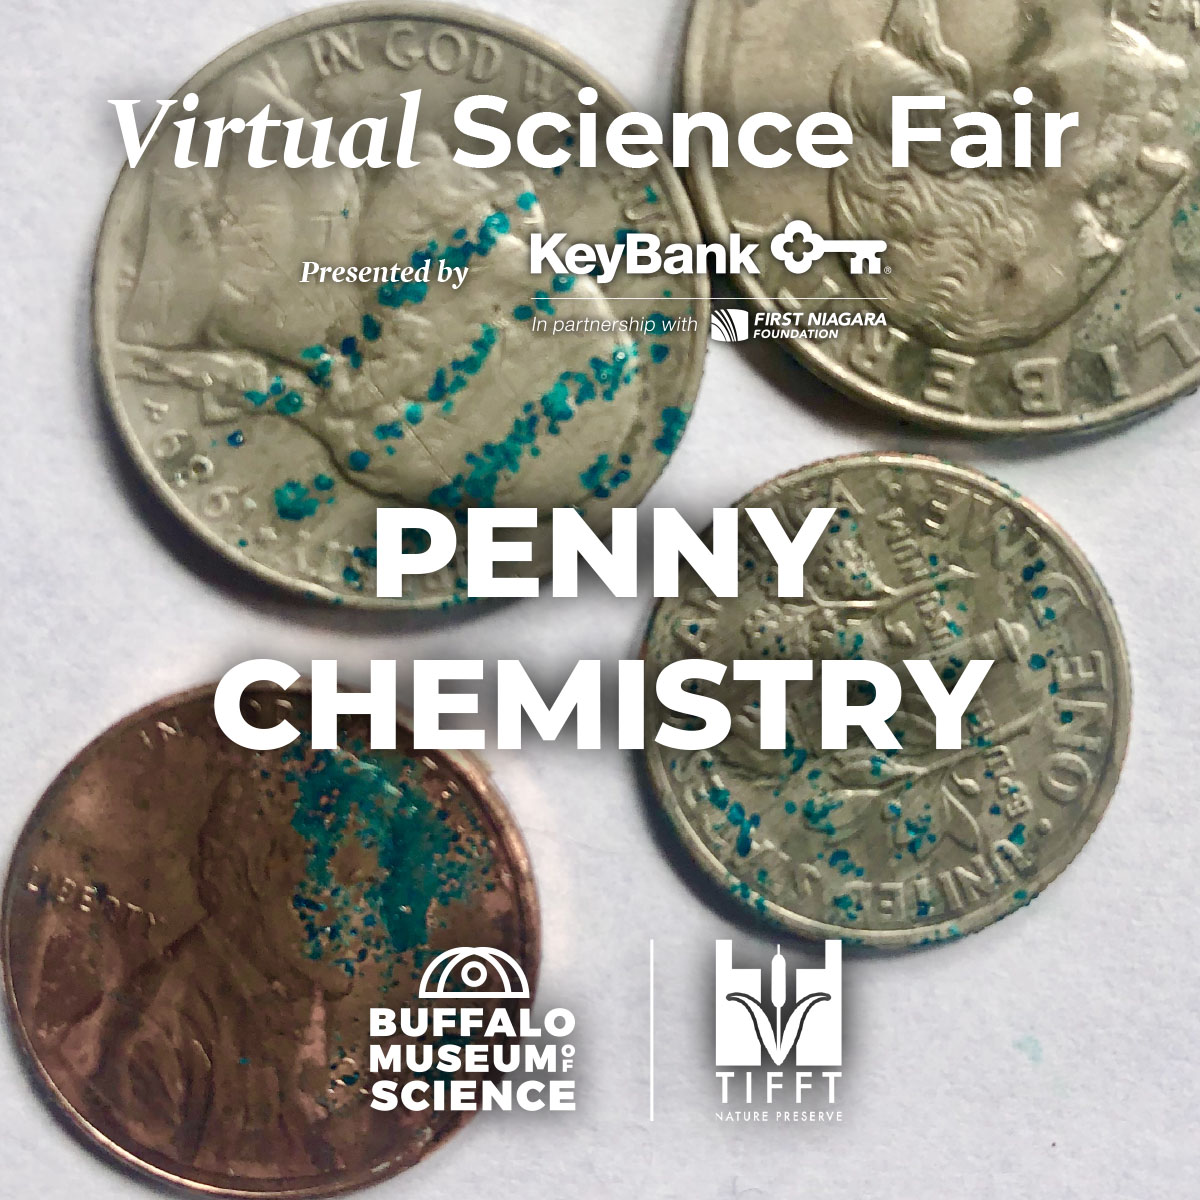 Penny Chemistry - Buffalo Museum of Science